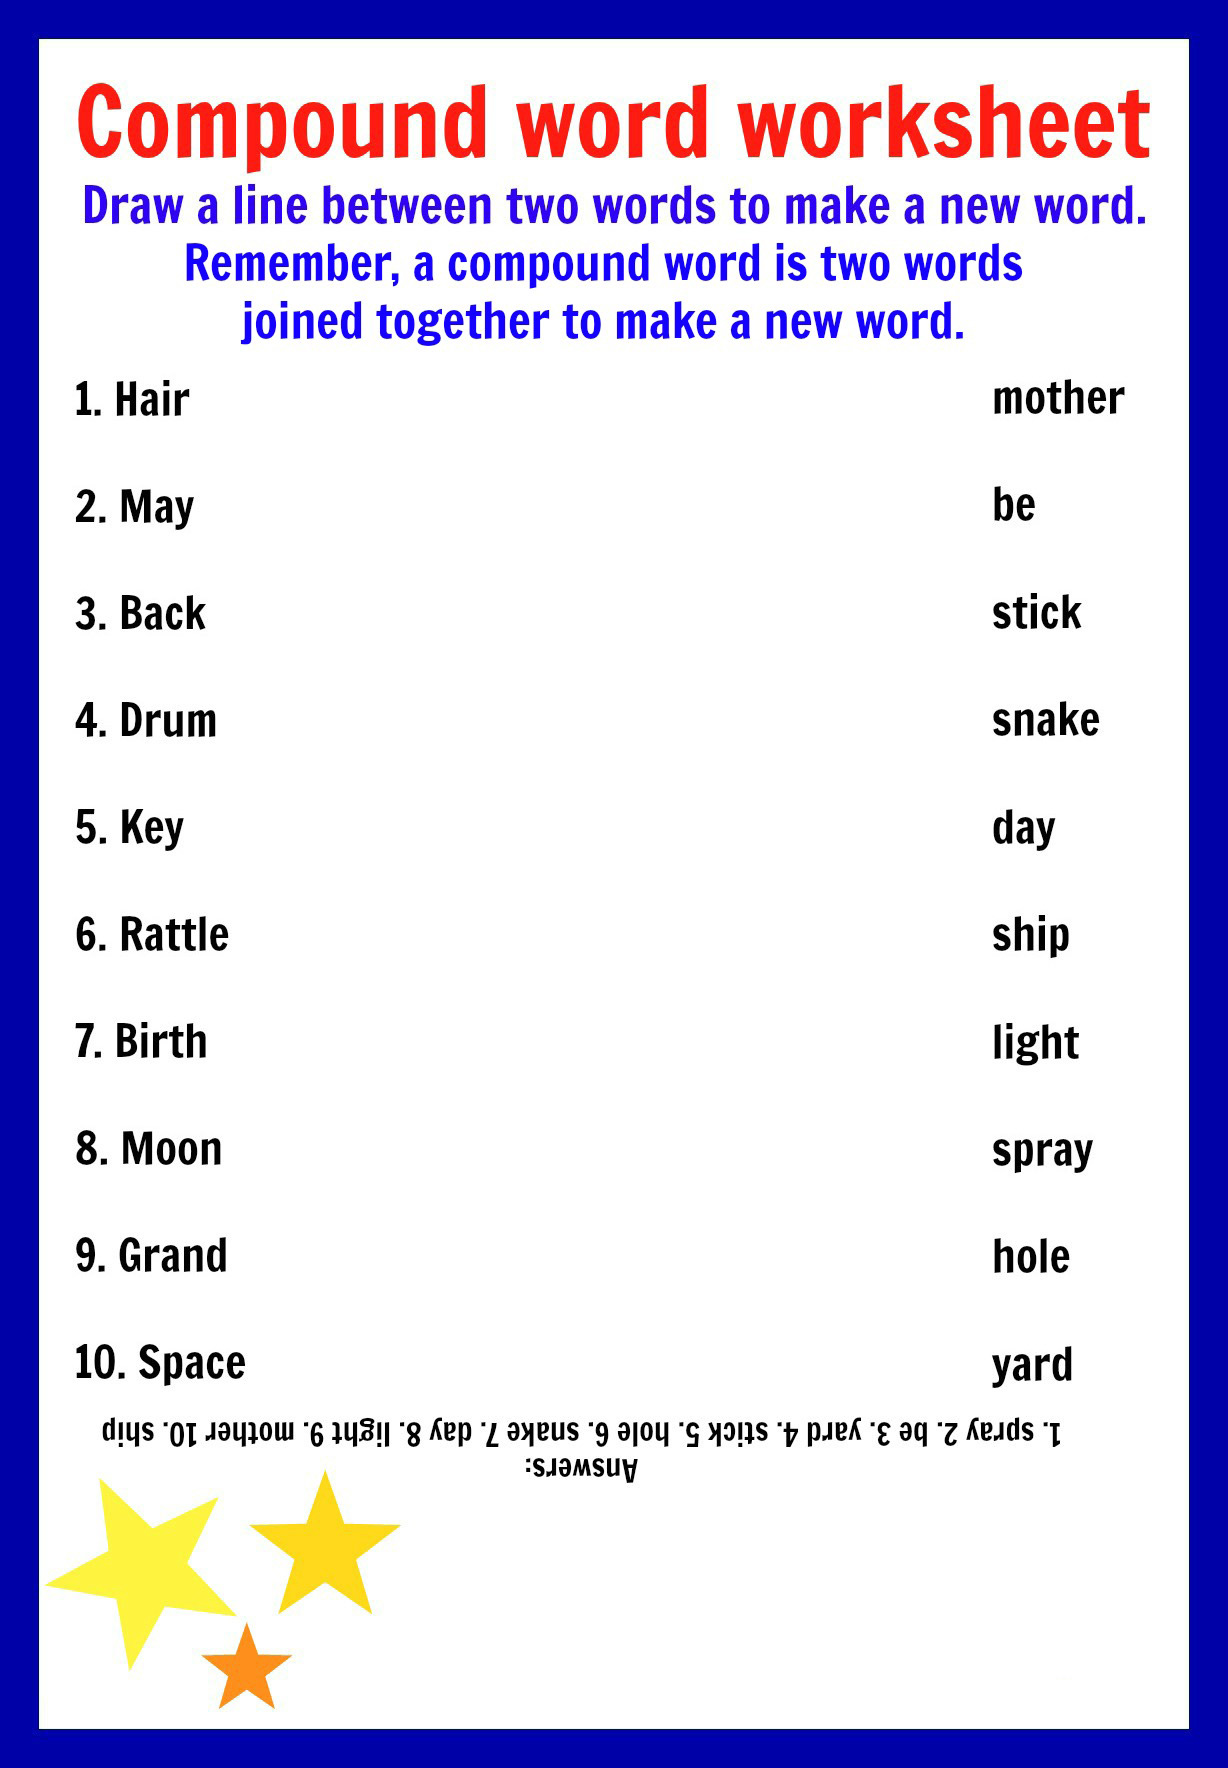 free-compound-word-worksheets